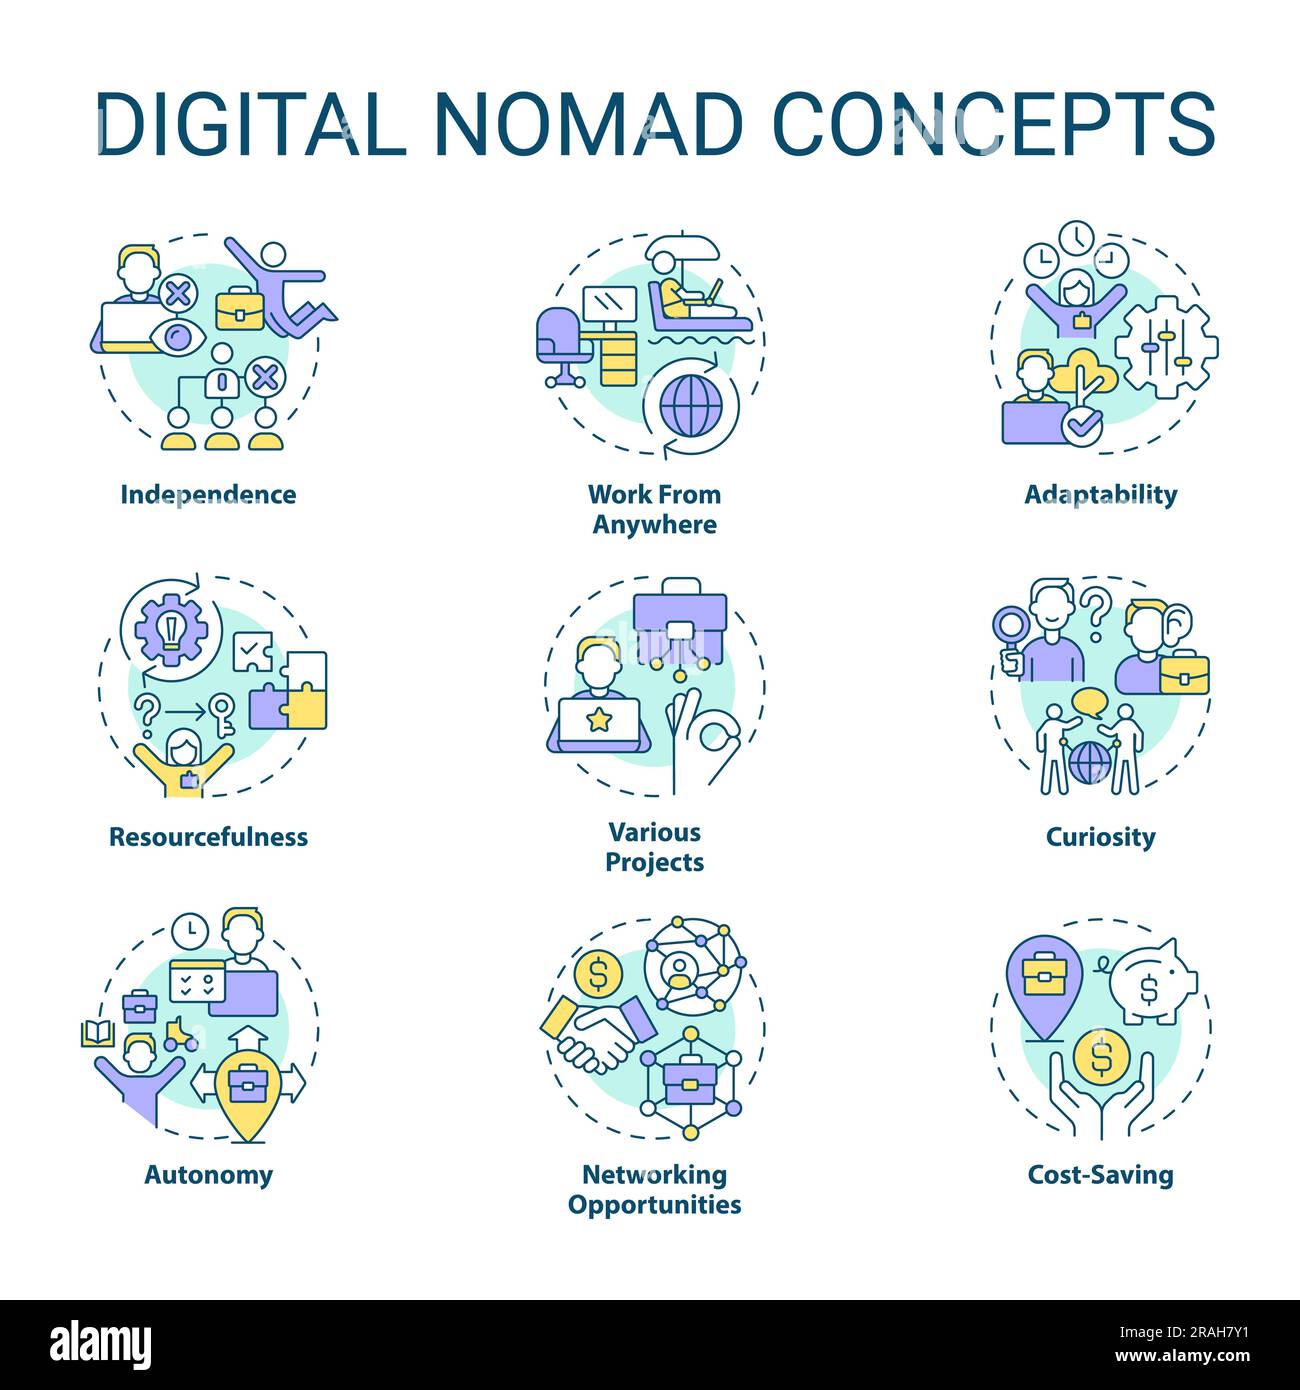 Digital nomad concept icons set Stock Vector